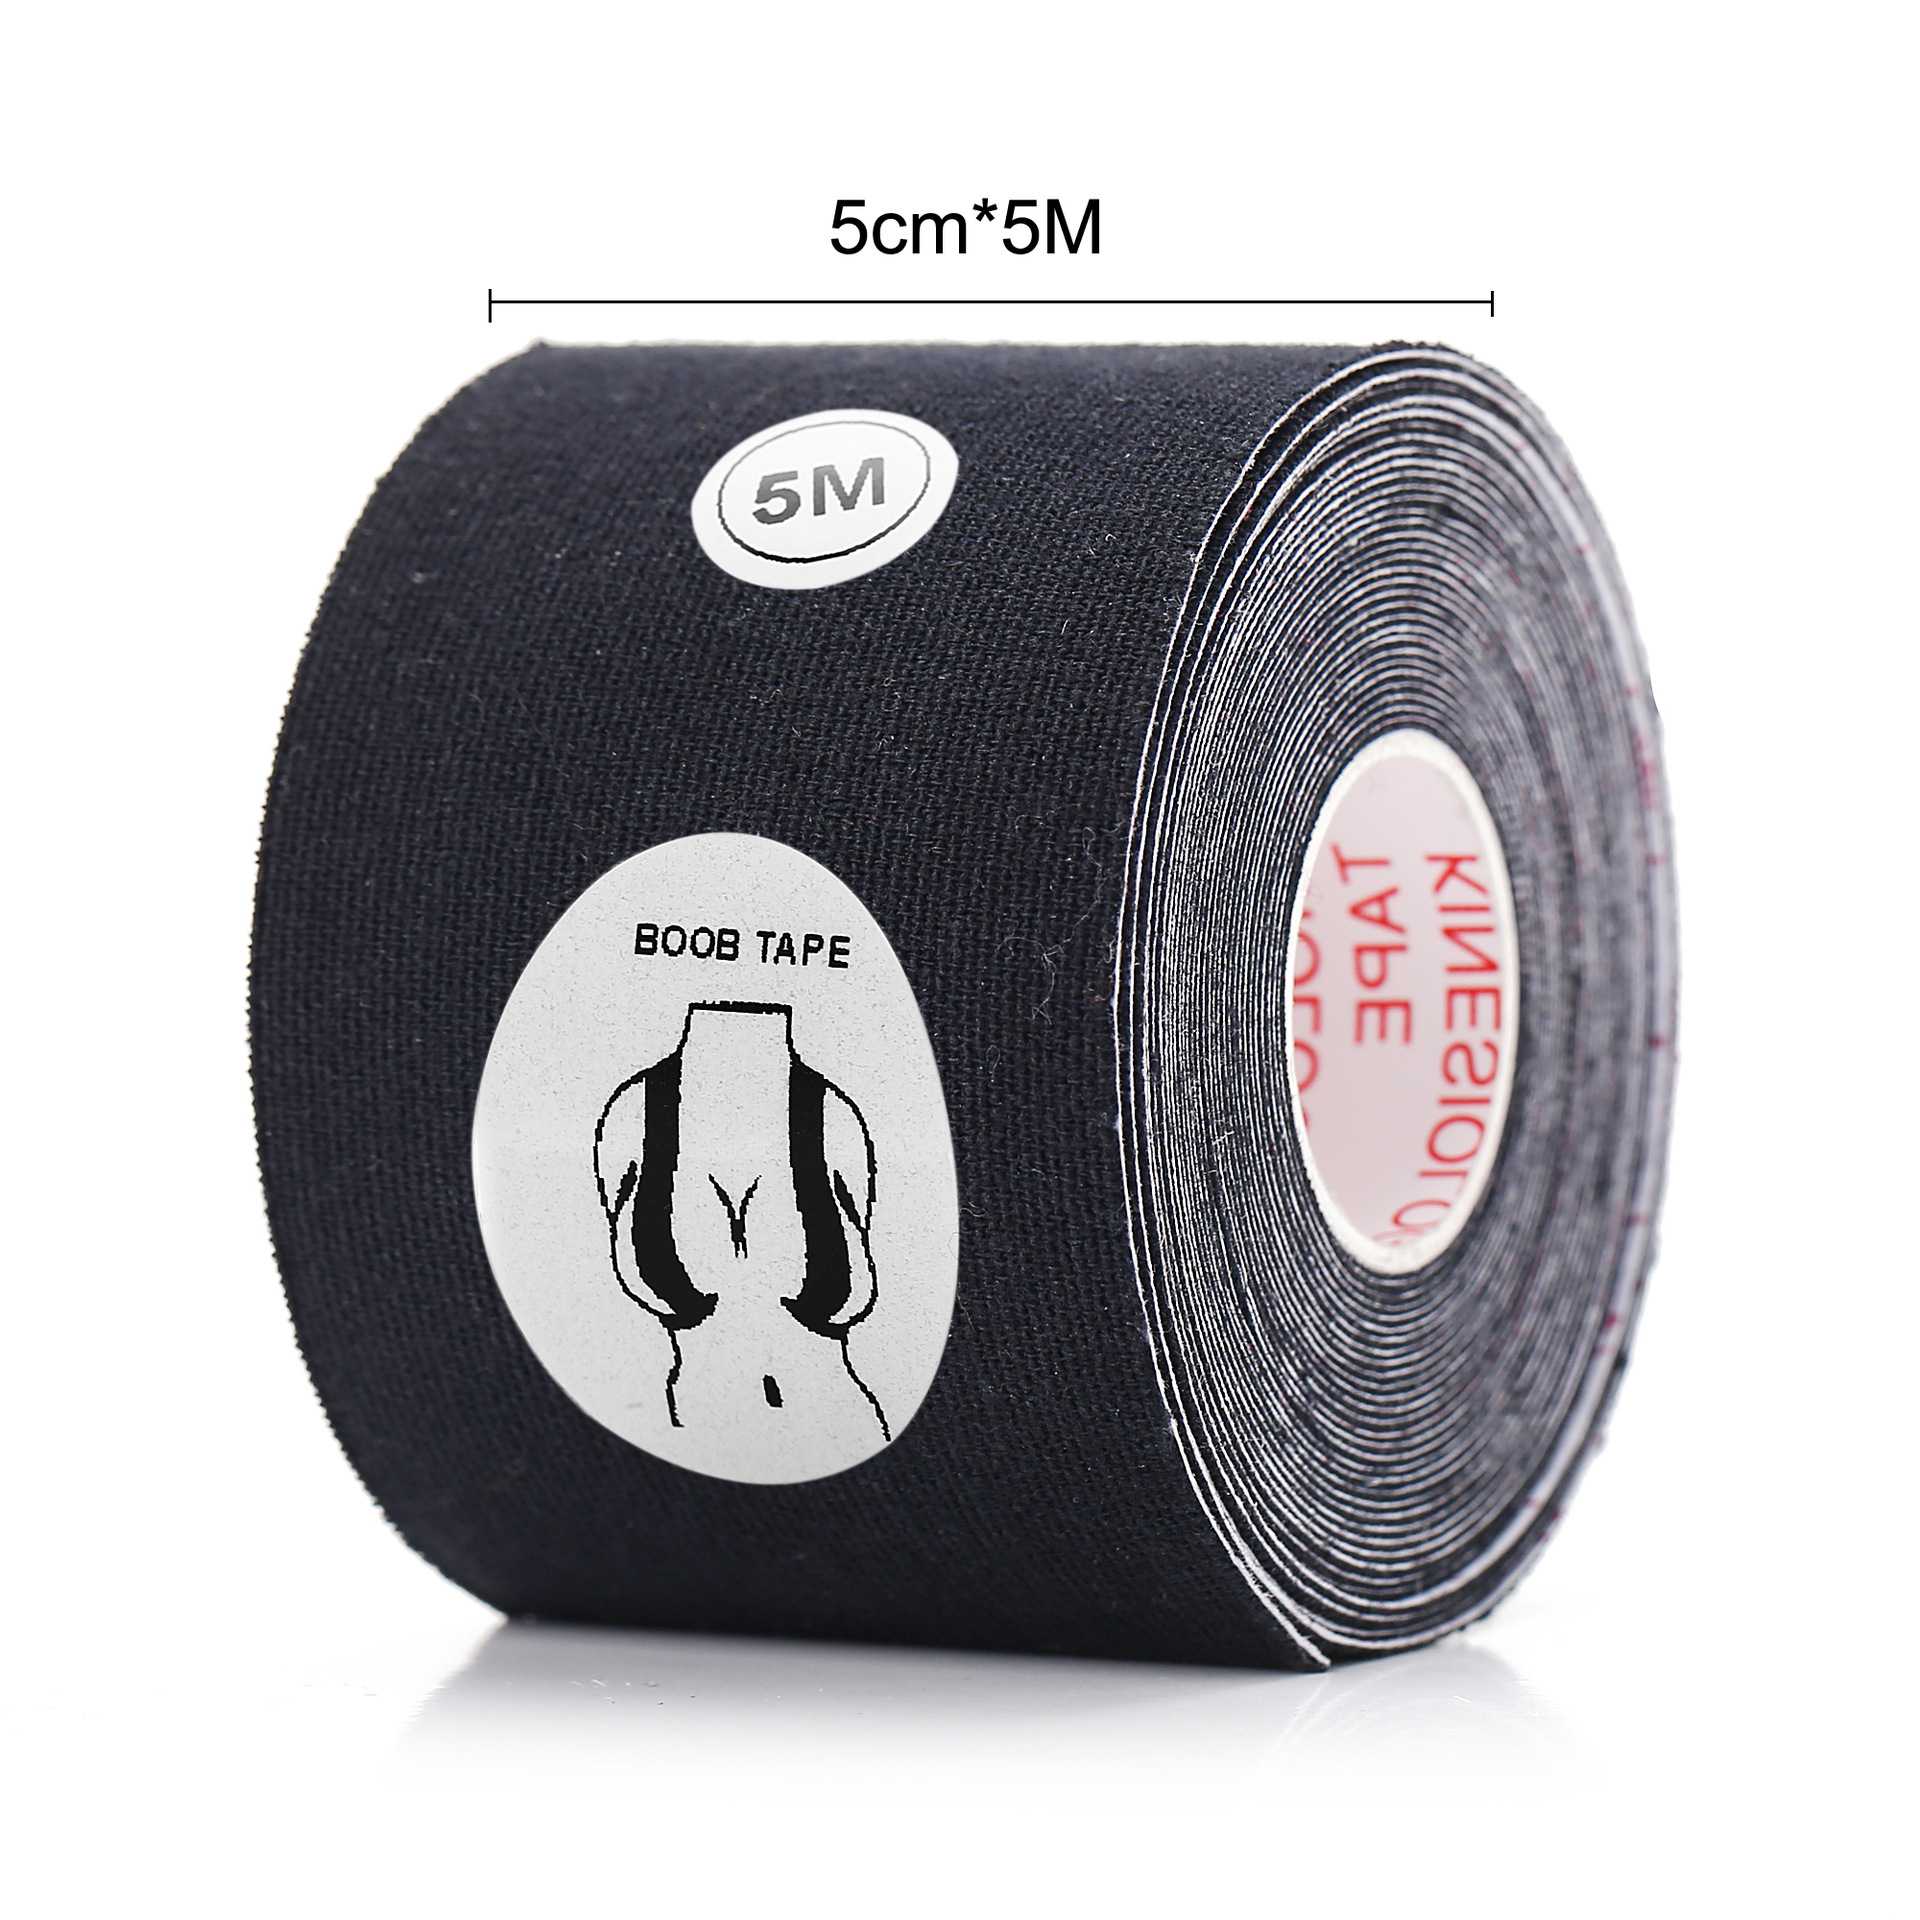 GYTFOG Boob Tape, 5M Extra-Long Roll Booby Tape with 2 Pcs